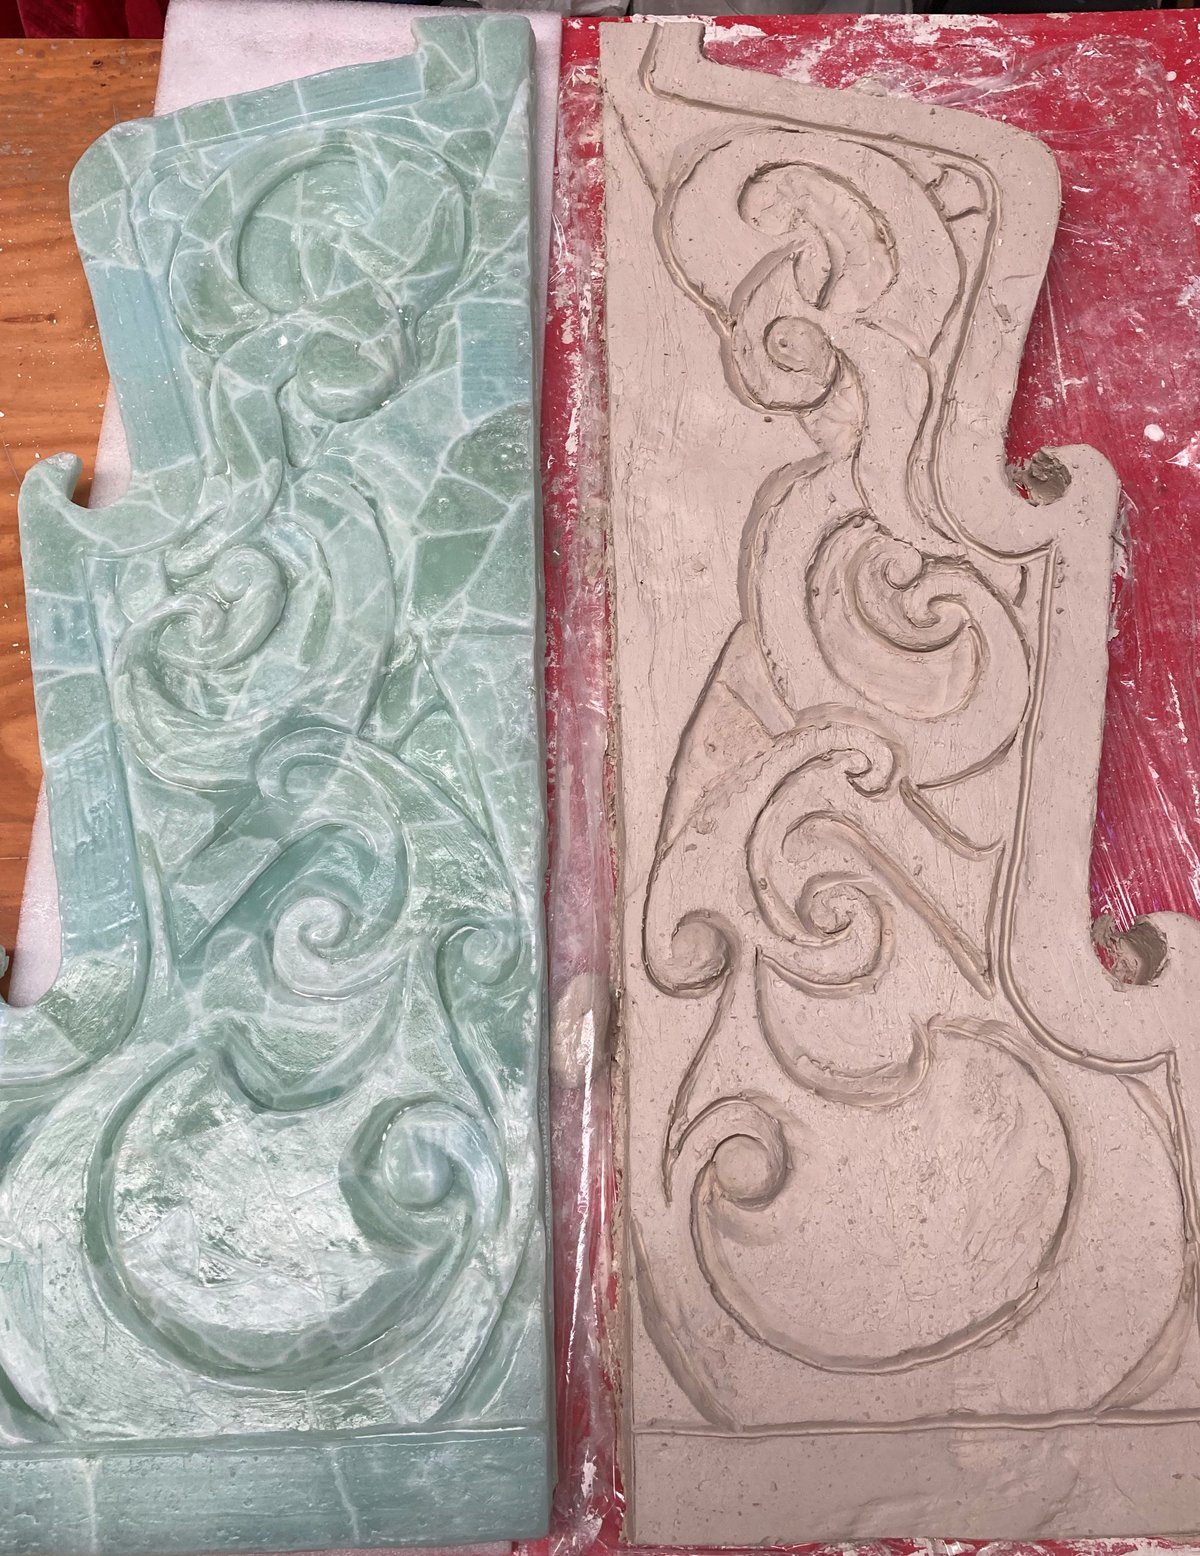 The left side of the image depicts a sculptural form made from green glass. On the right side of the image is the same form, but made out of clay.